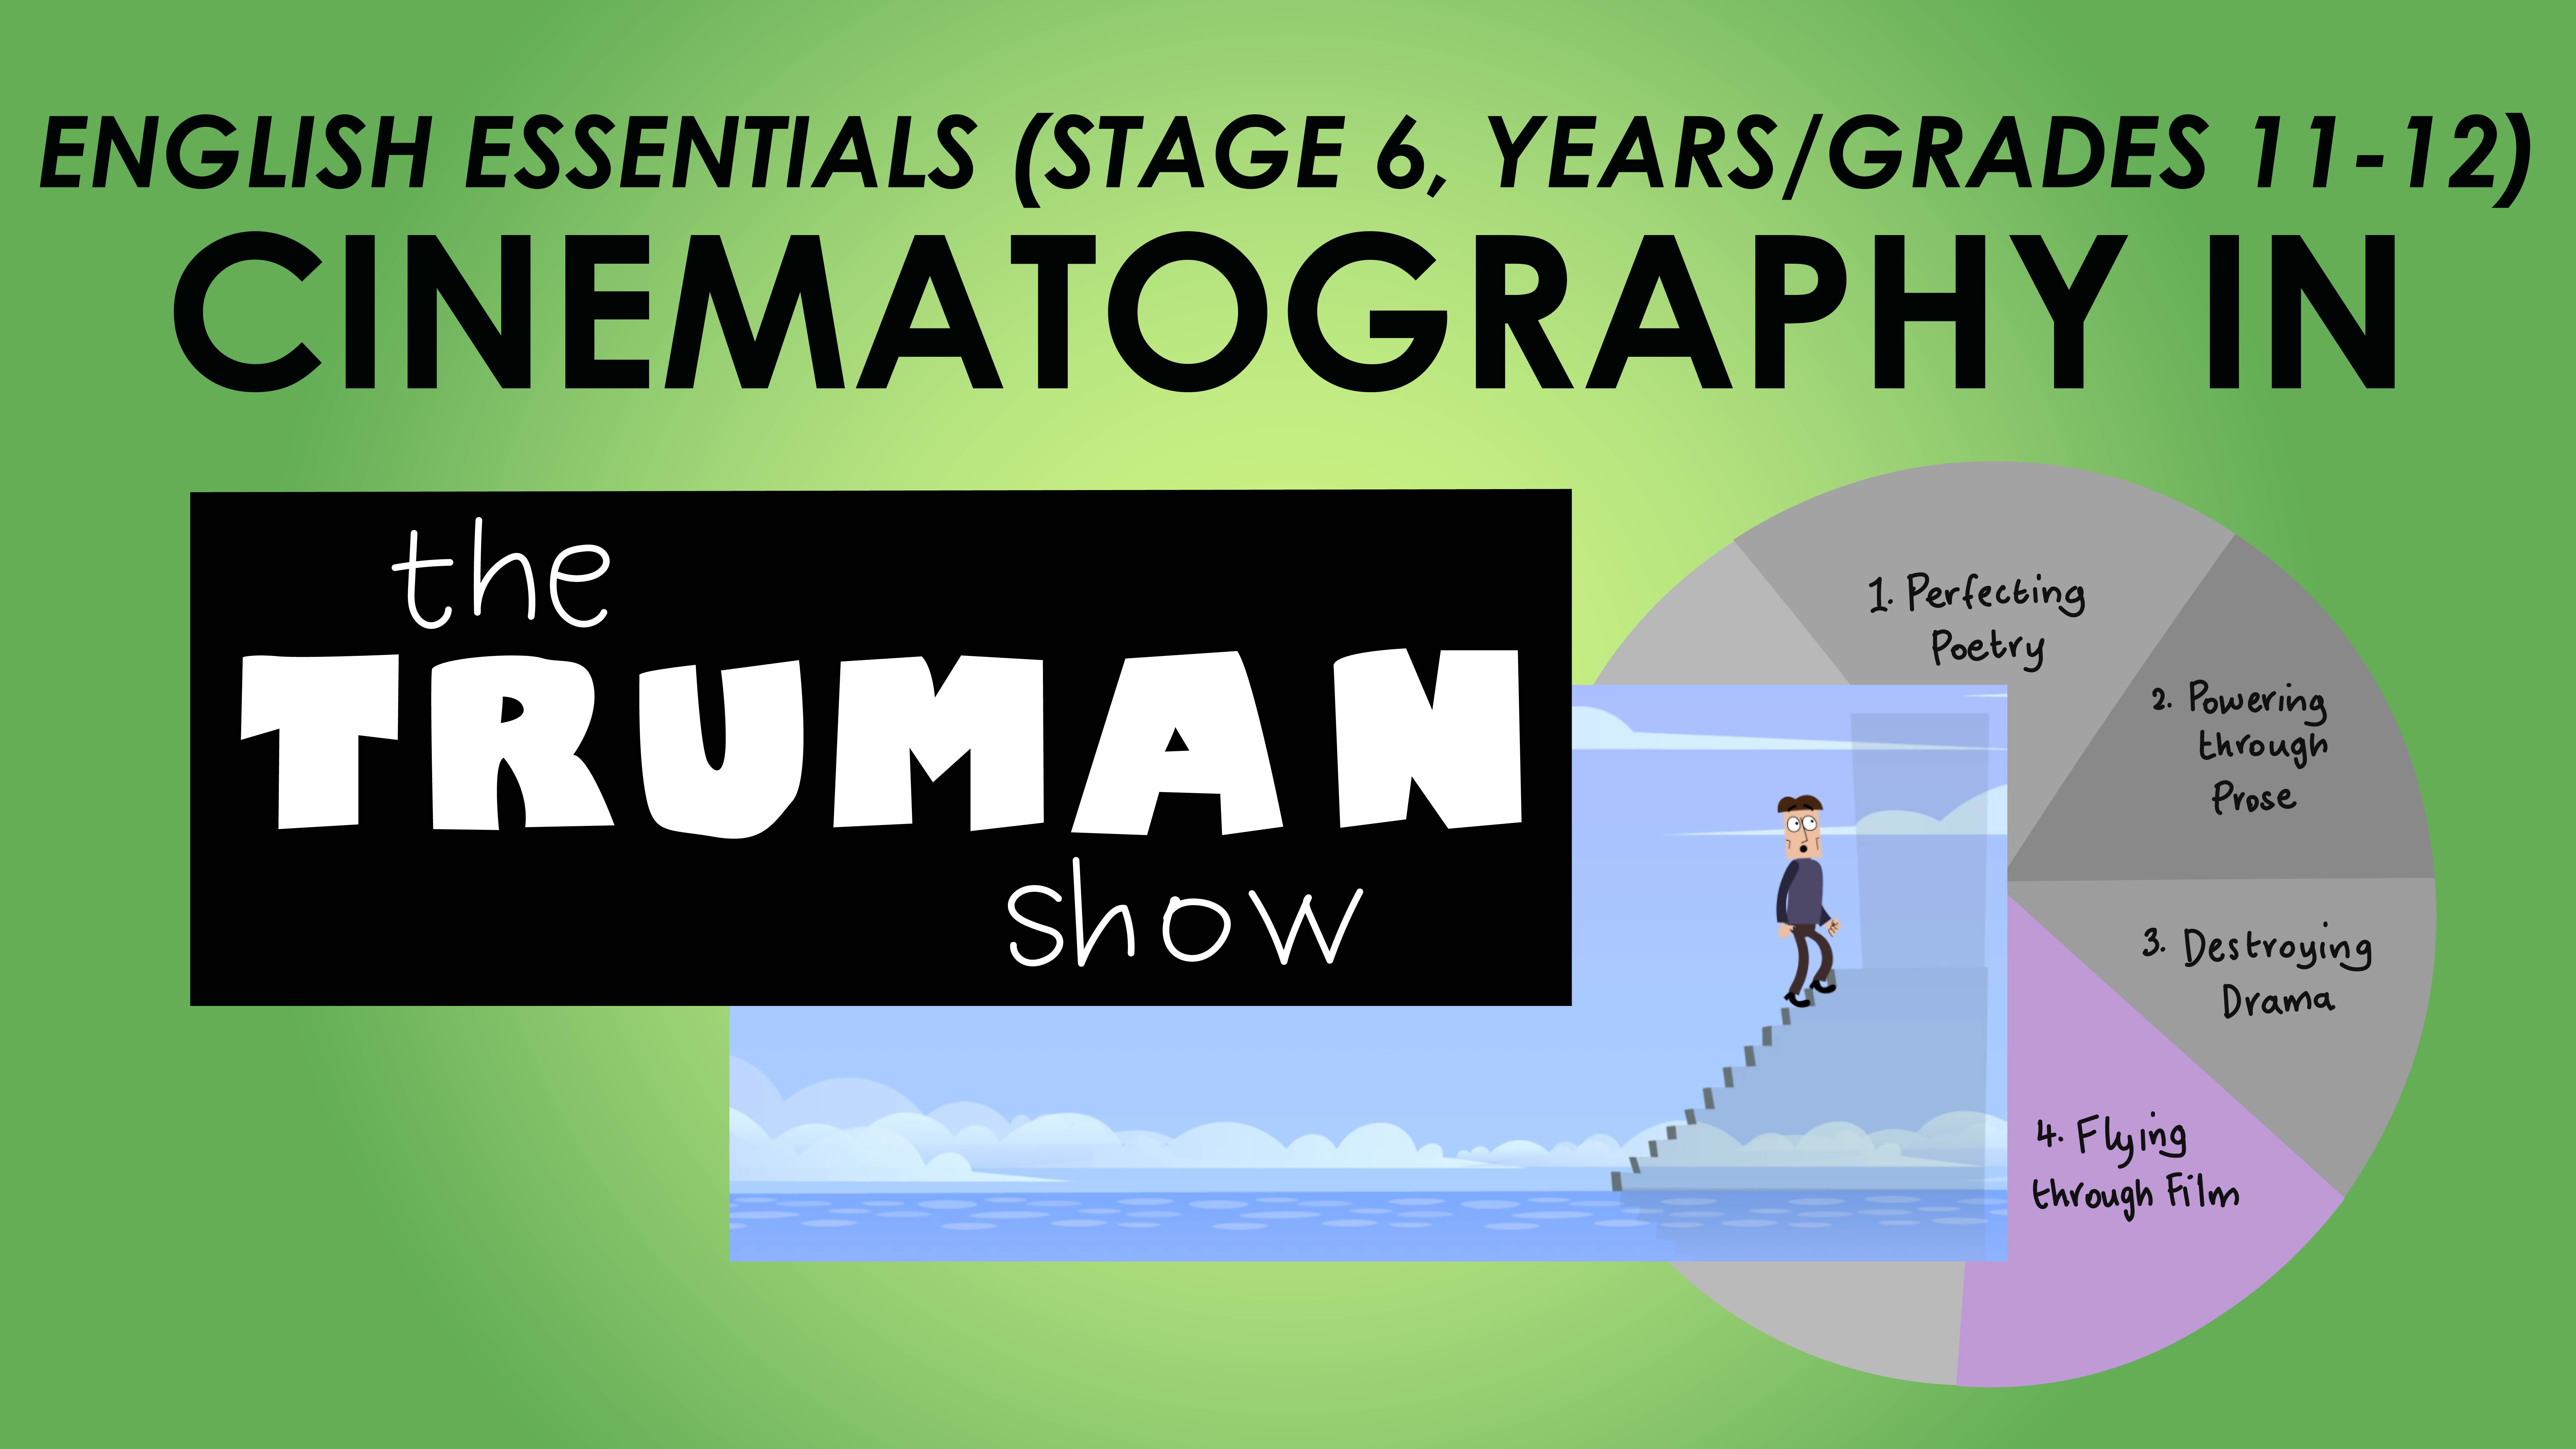 English Essentials - Flying Through Film – Cinematography in the Truman Show (Stage 6, Years/Grades 11-12)